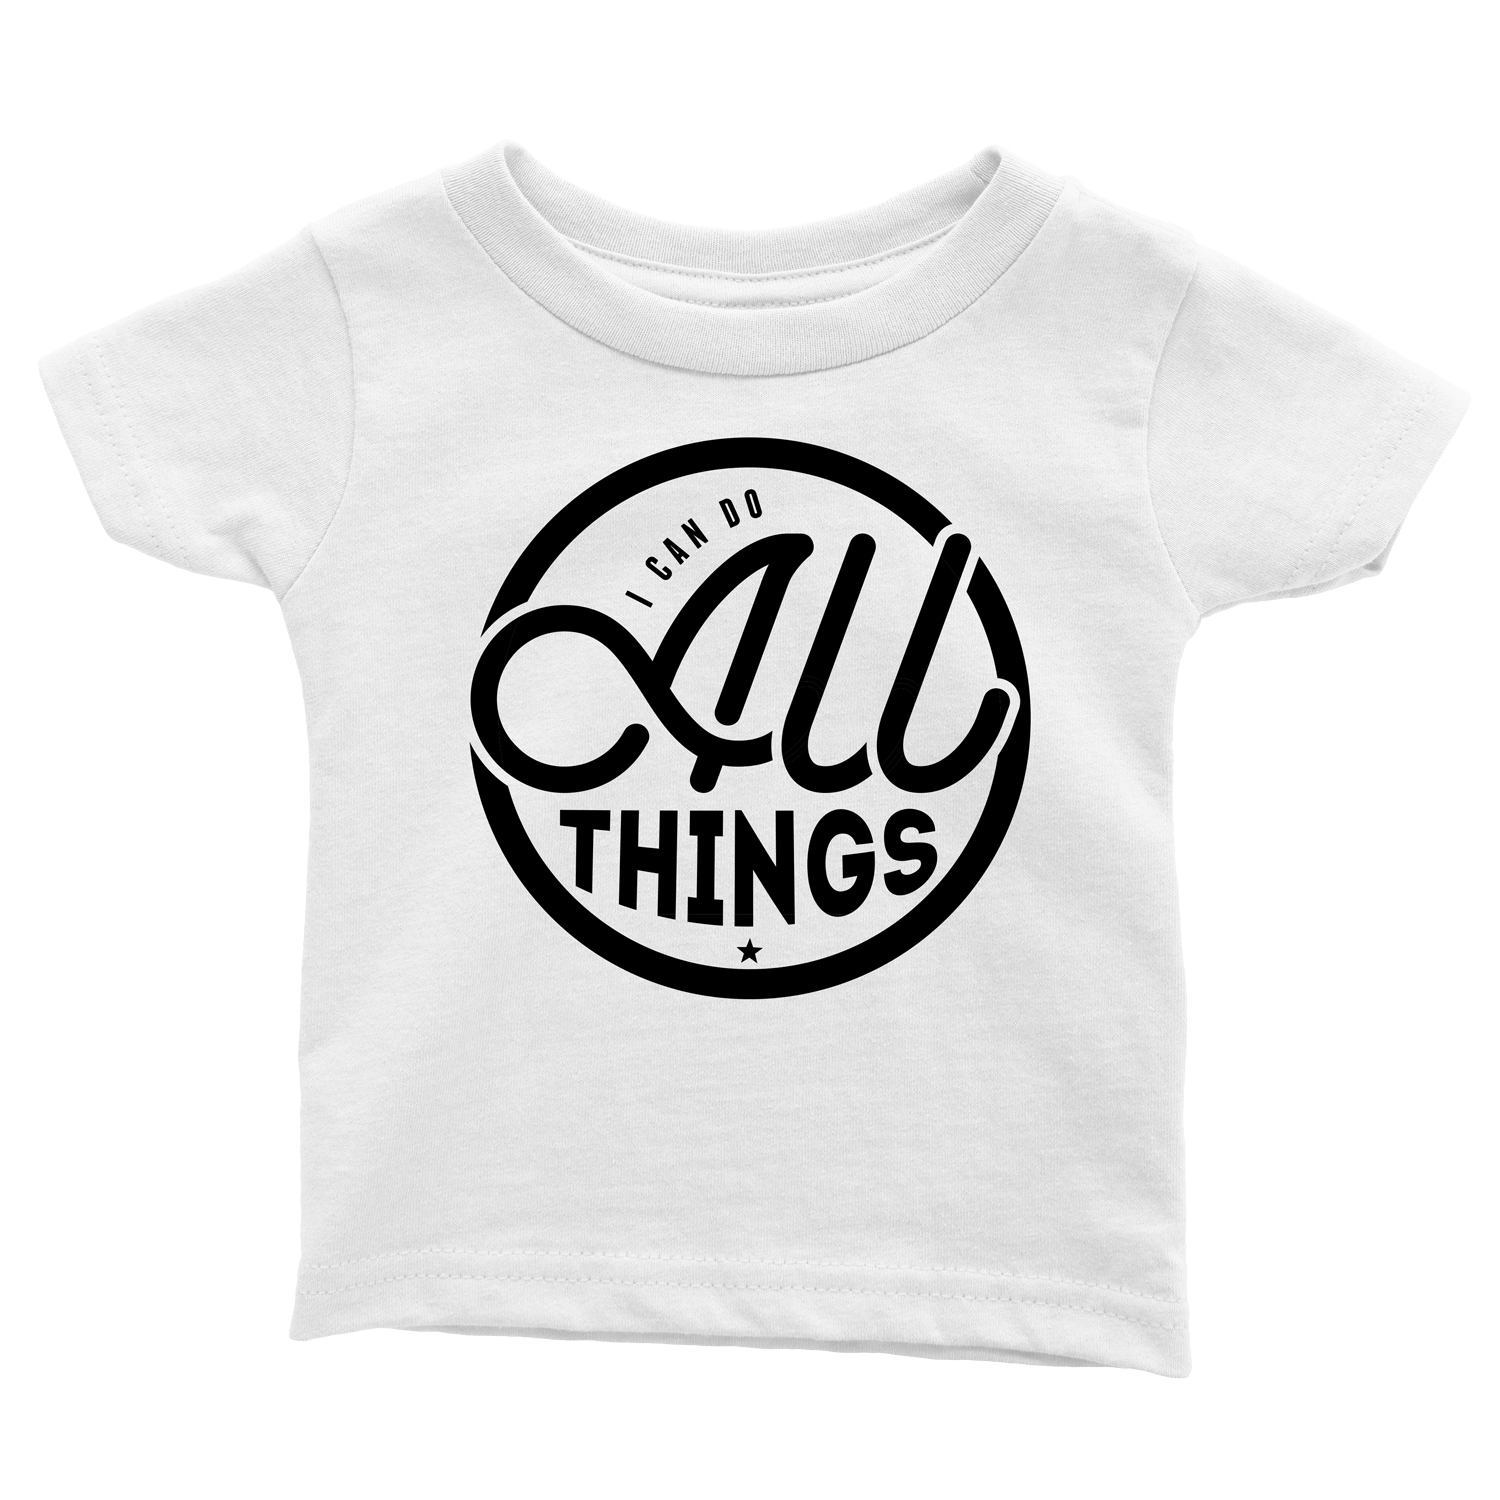 I Can Do All Things Infant Tees - Beacon Threads - 12-18M / White w/ Black Lettering - 2